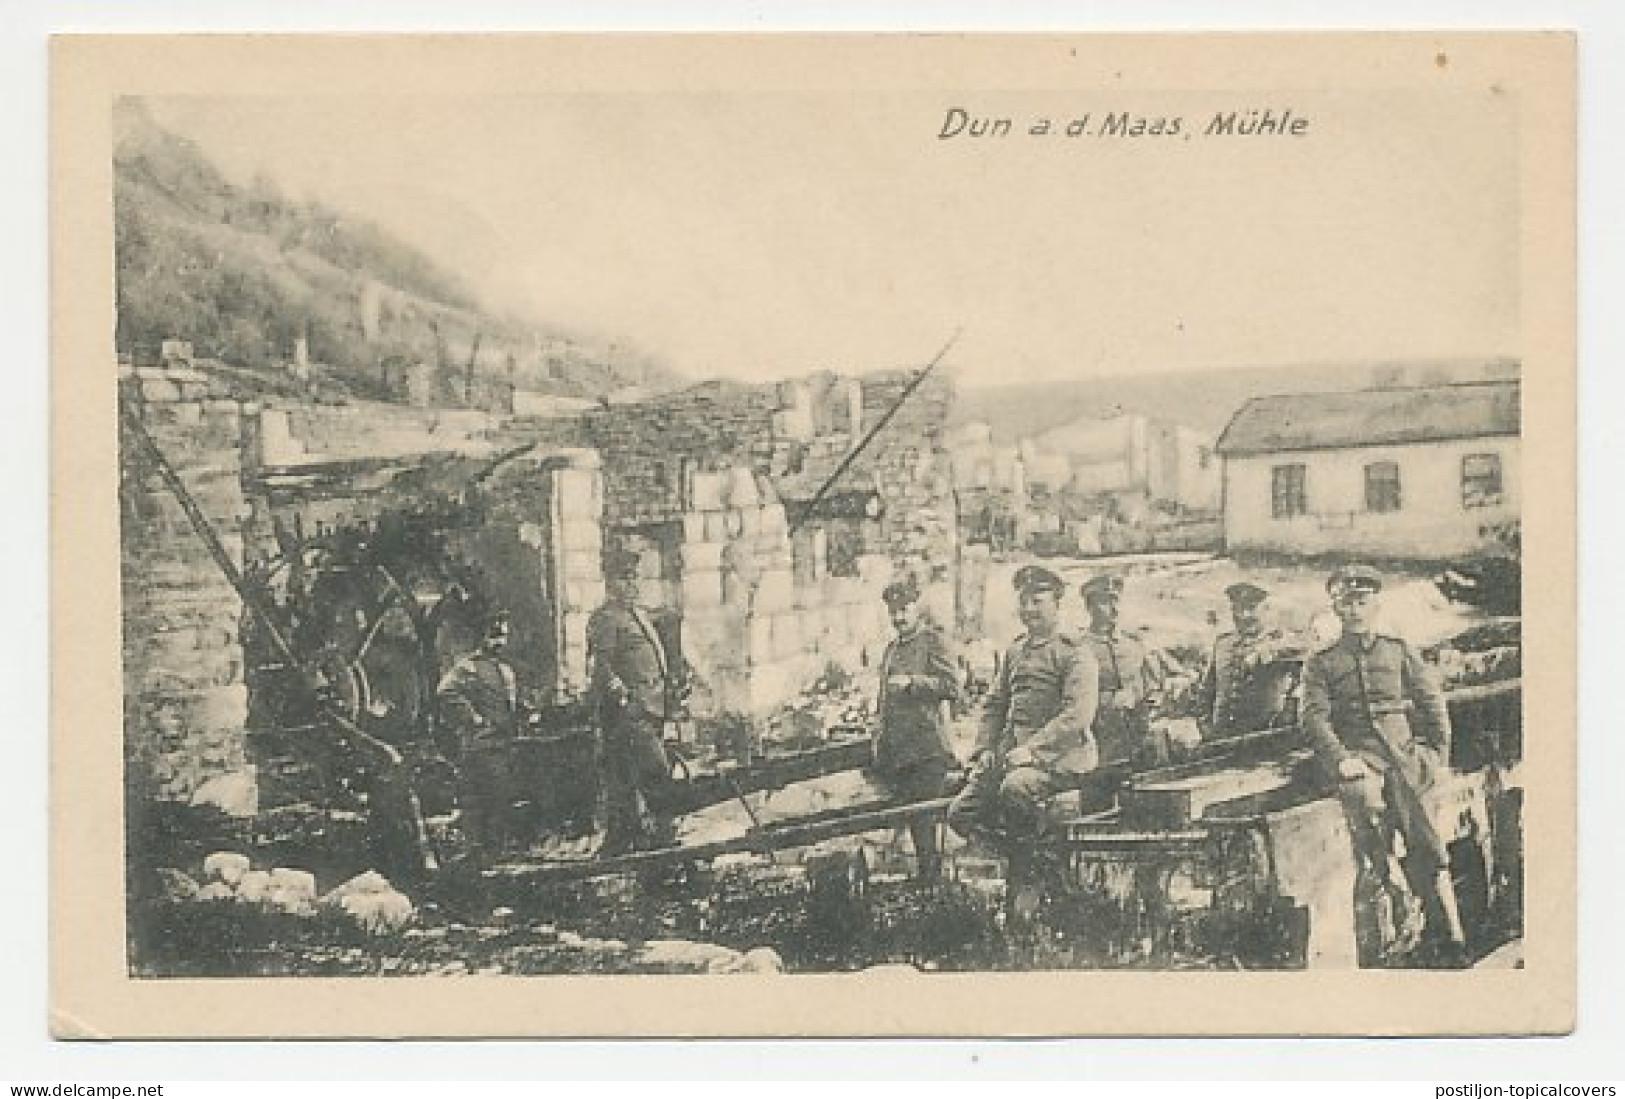 Fieldpost Postcard Germany / France 1916 Soldiers - Dun Sur Meuse - WWI - WW1 (I Guerra Mundial)